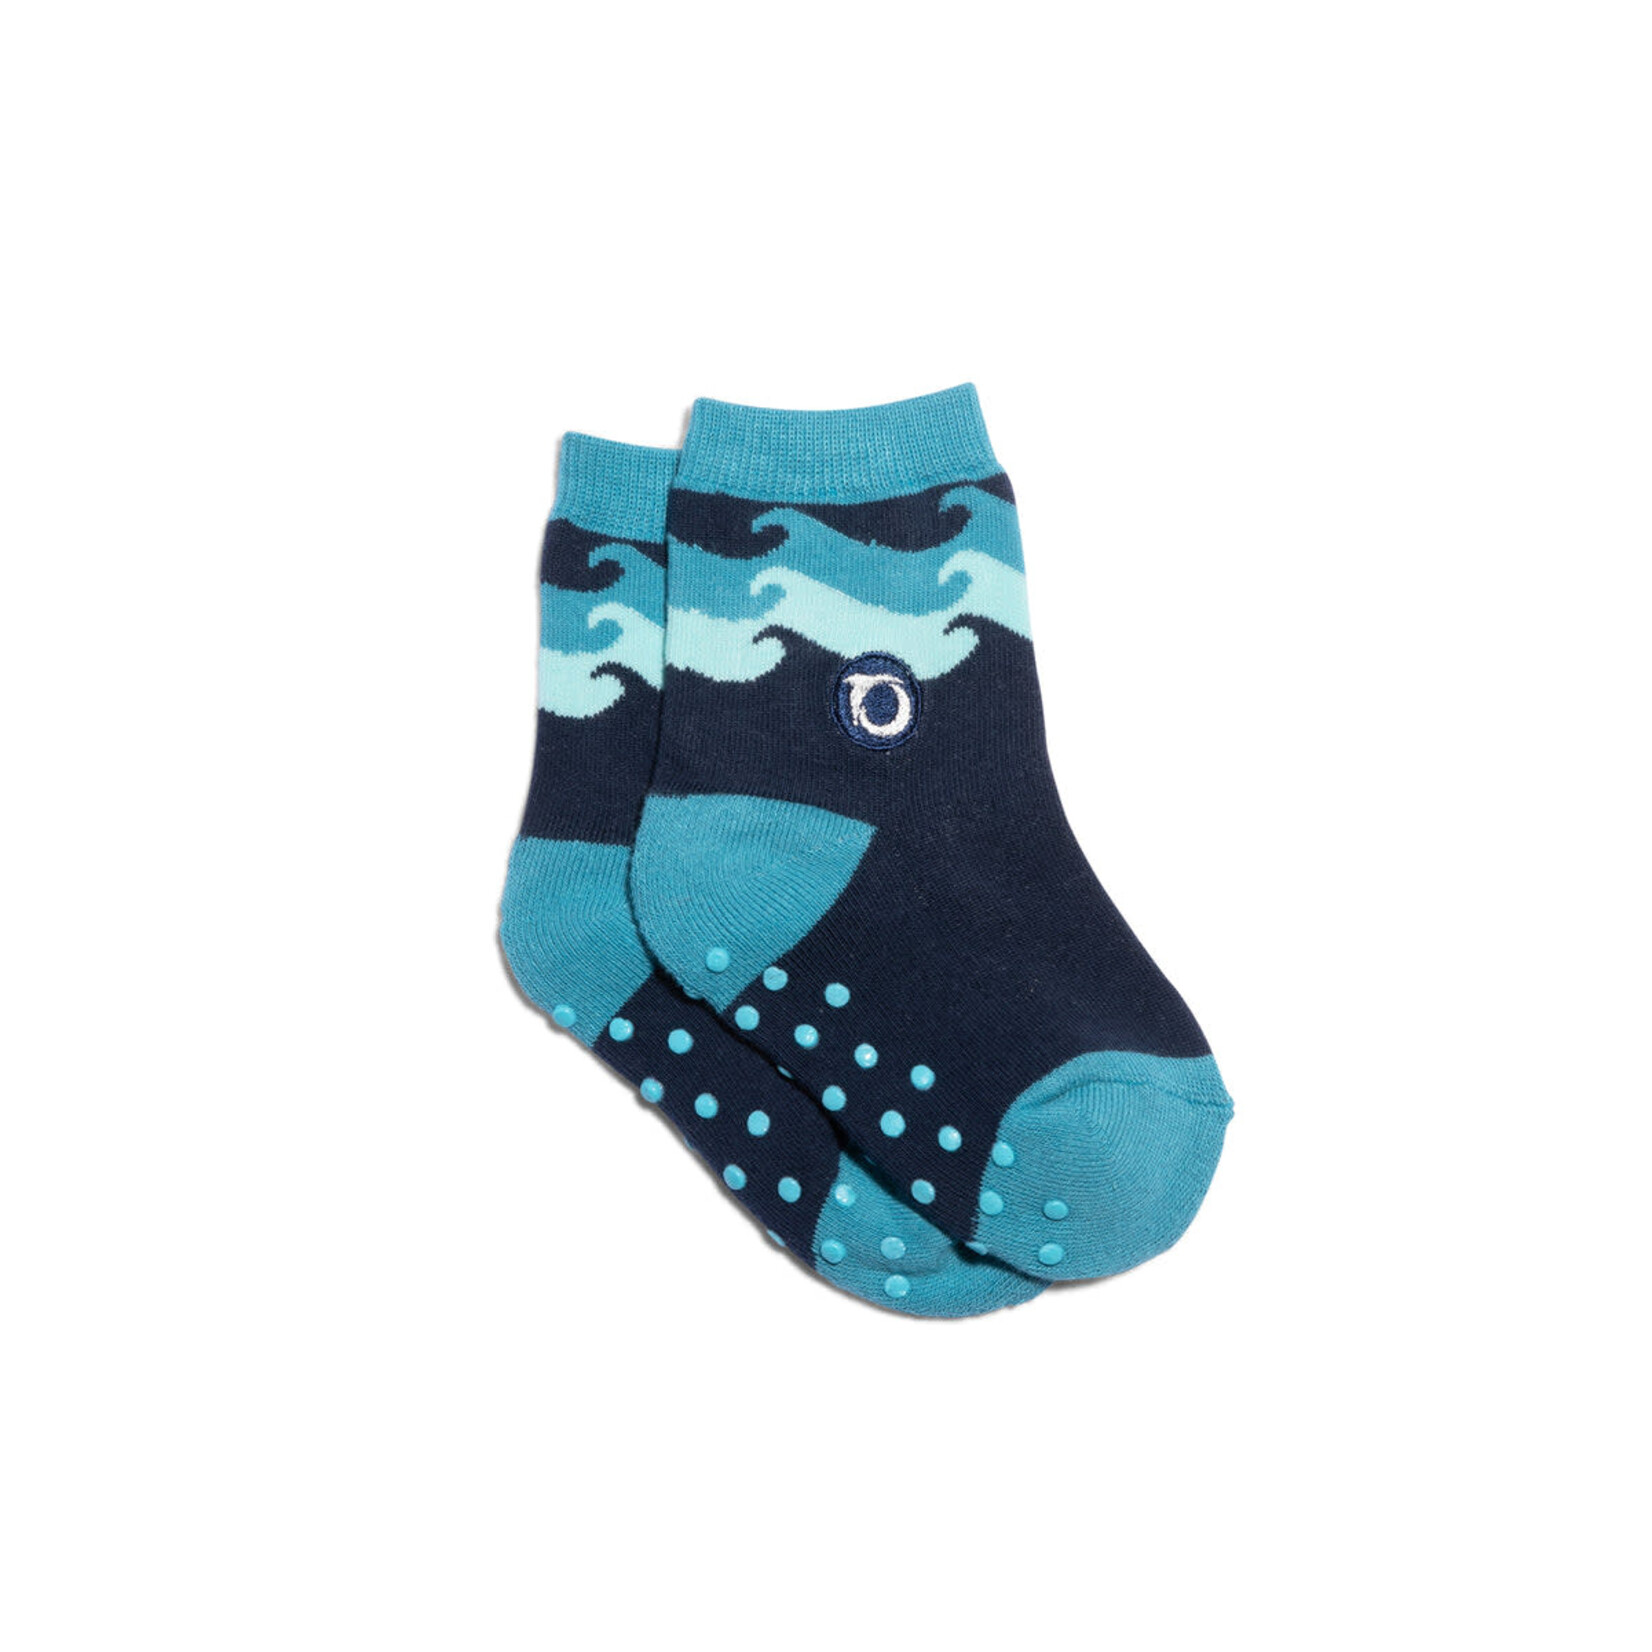 Conscious Step Kids Socks that Protect Oceans, Toddler